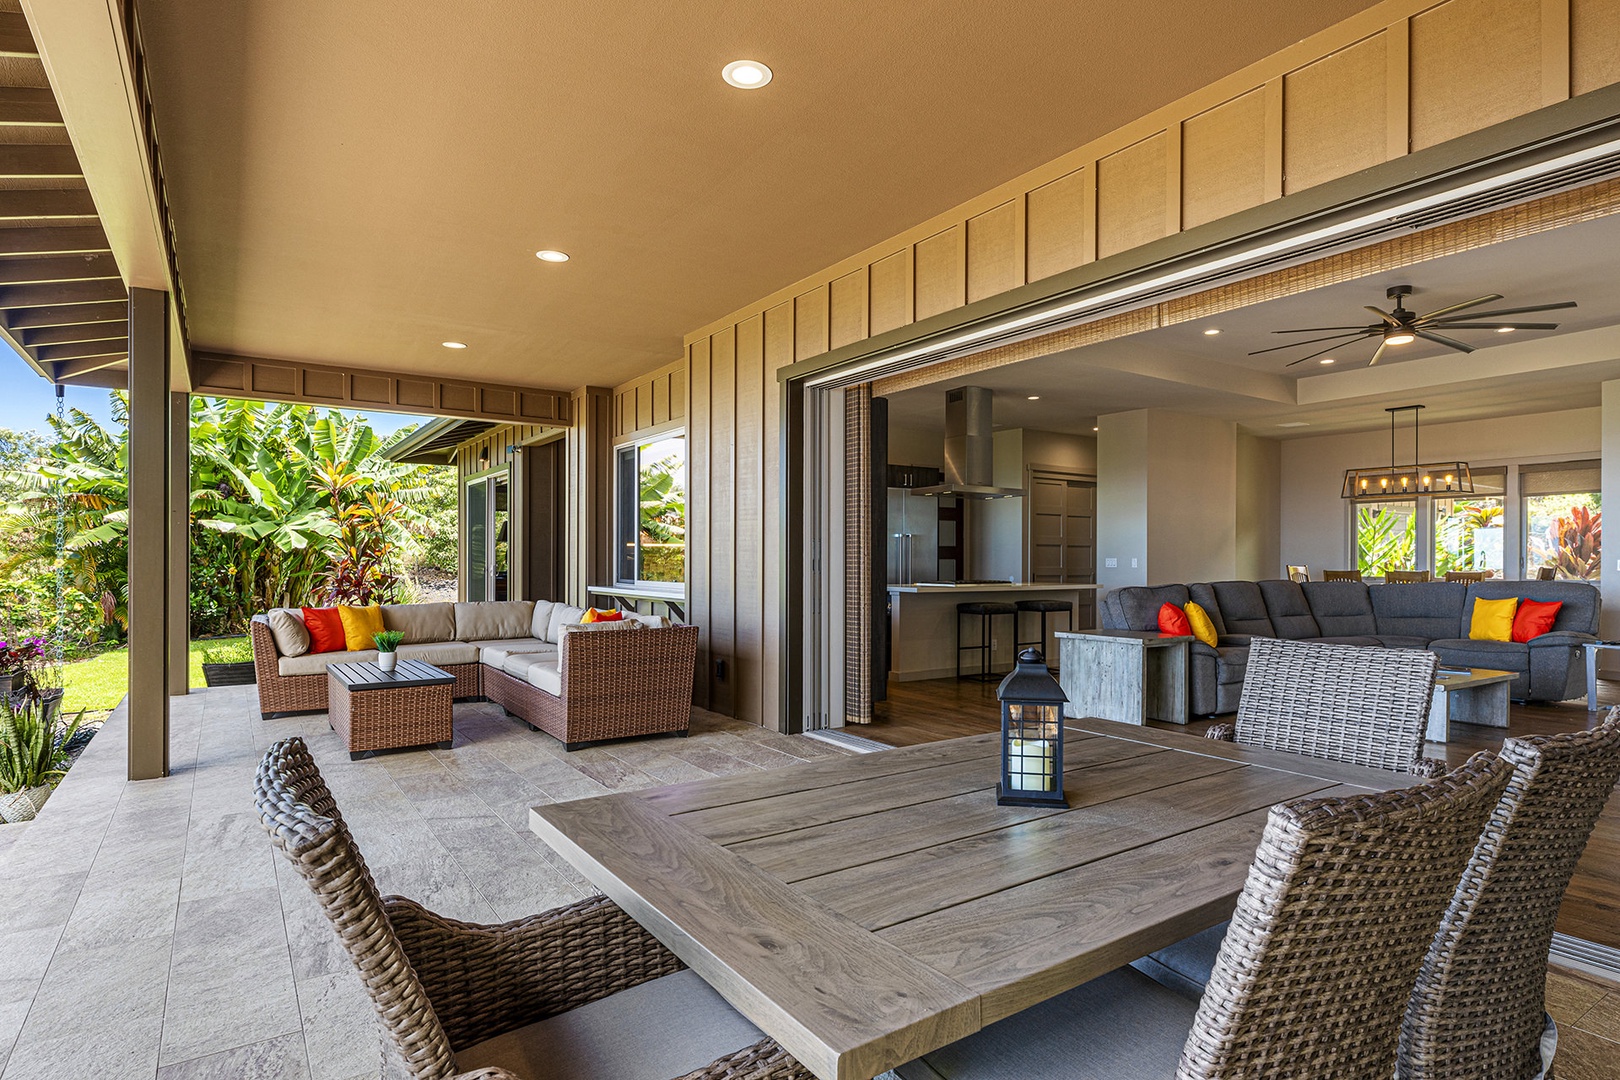 Lanai with ample outdoor furniture